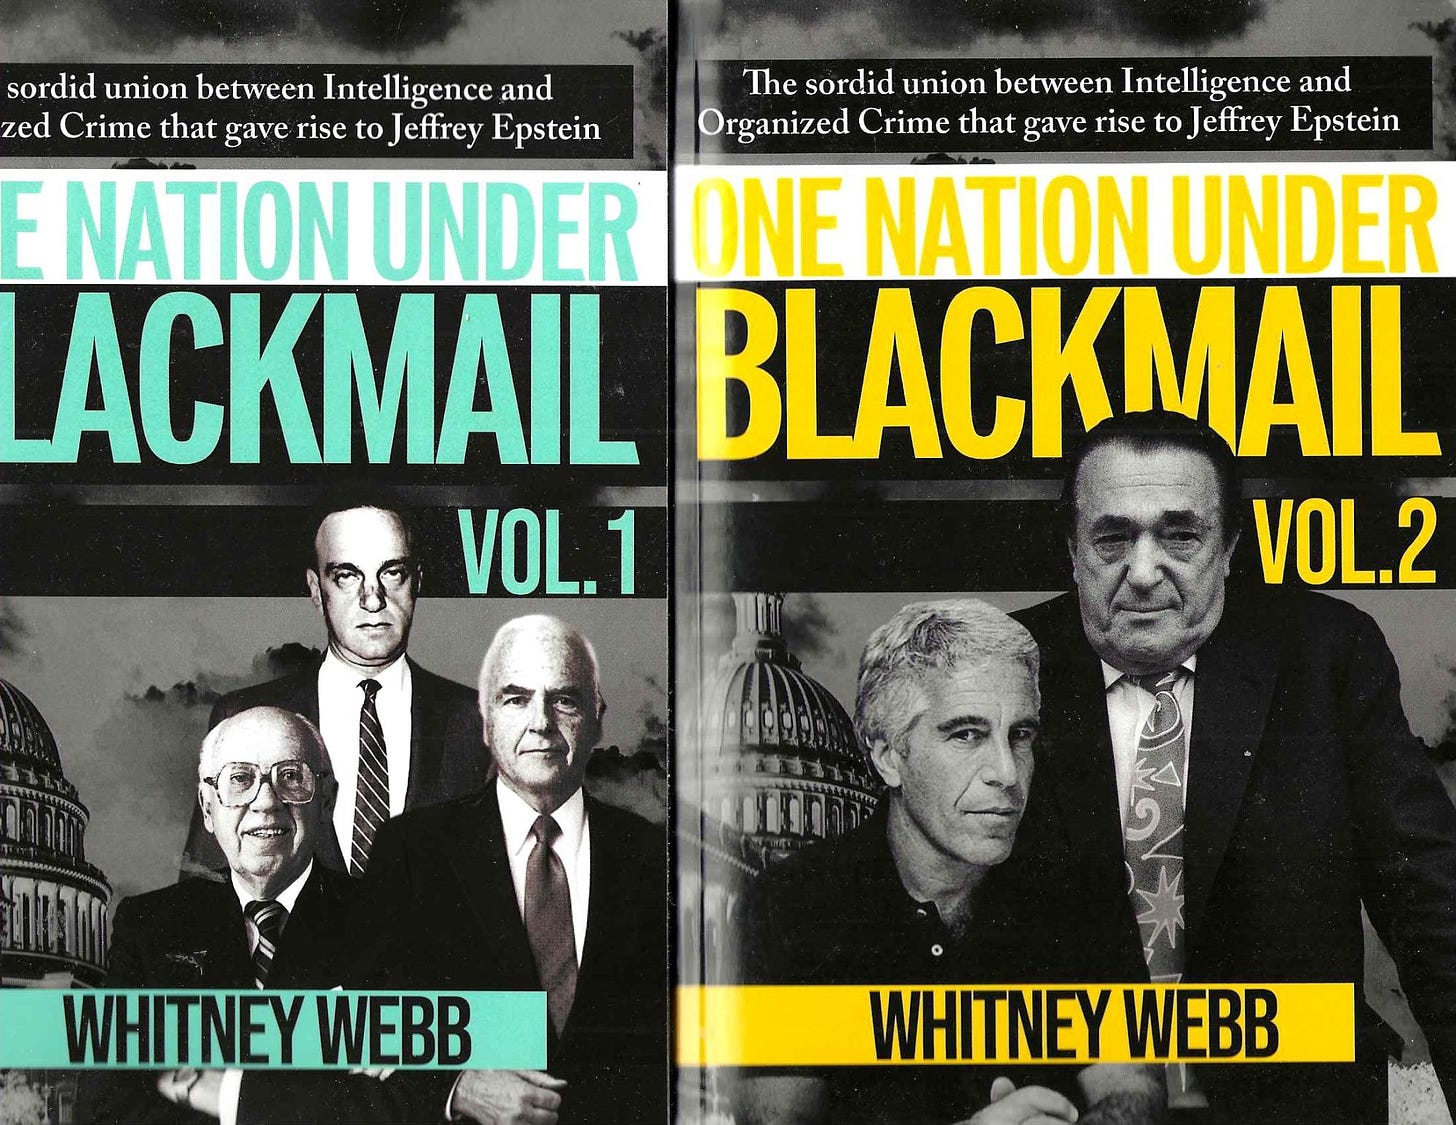 One Nation Under Blackmail Vol. 1 & Vol. 2 by Webb, Whitney - 2022